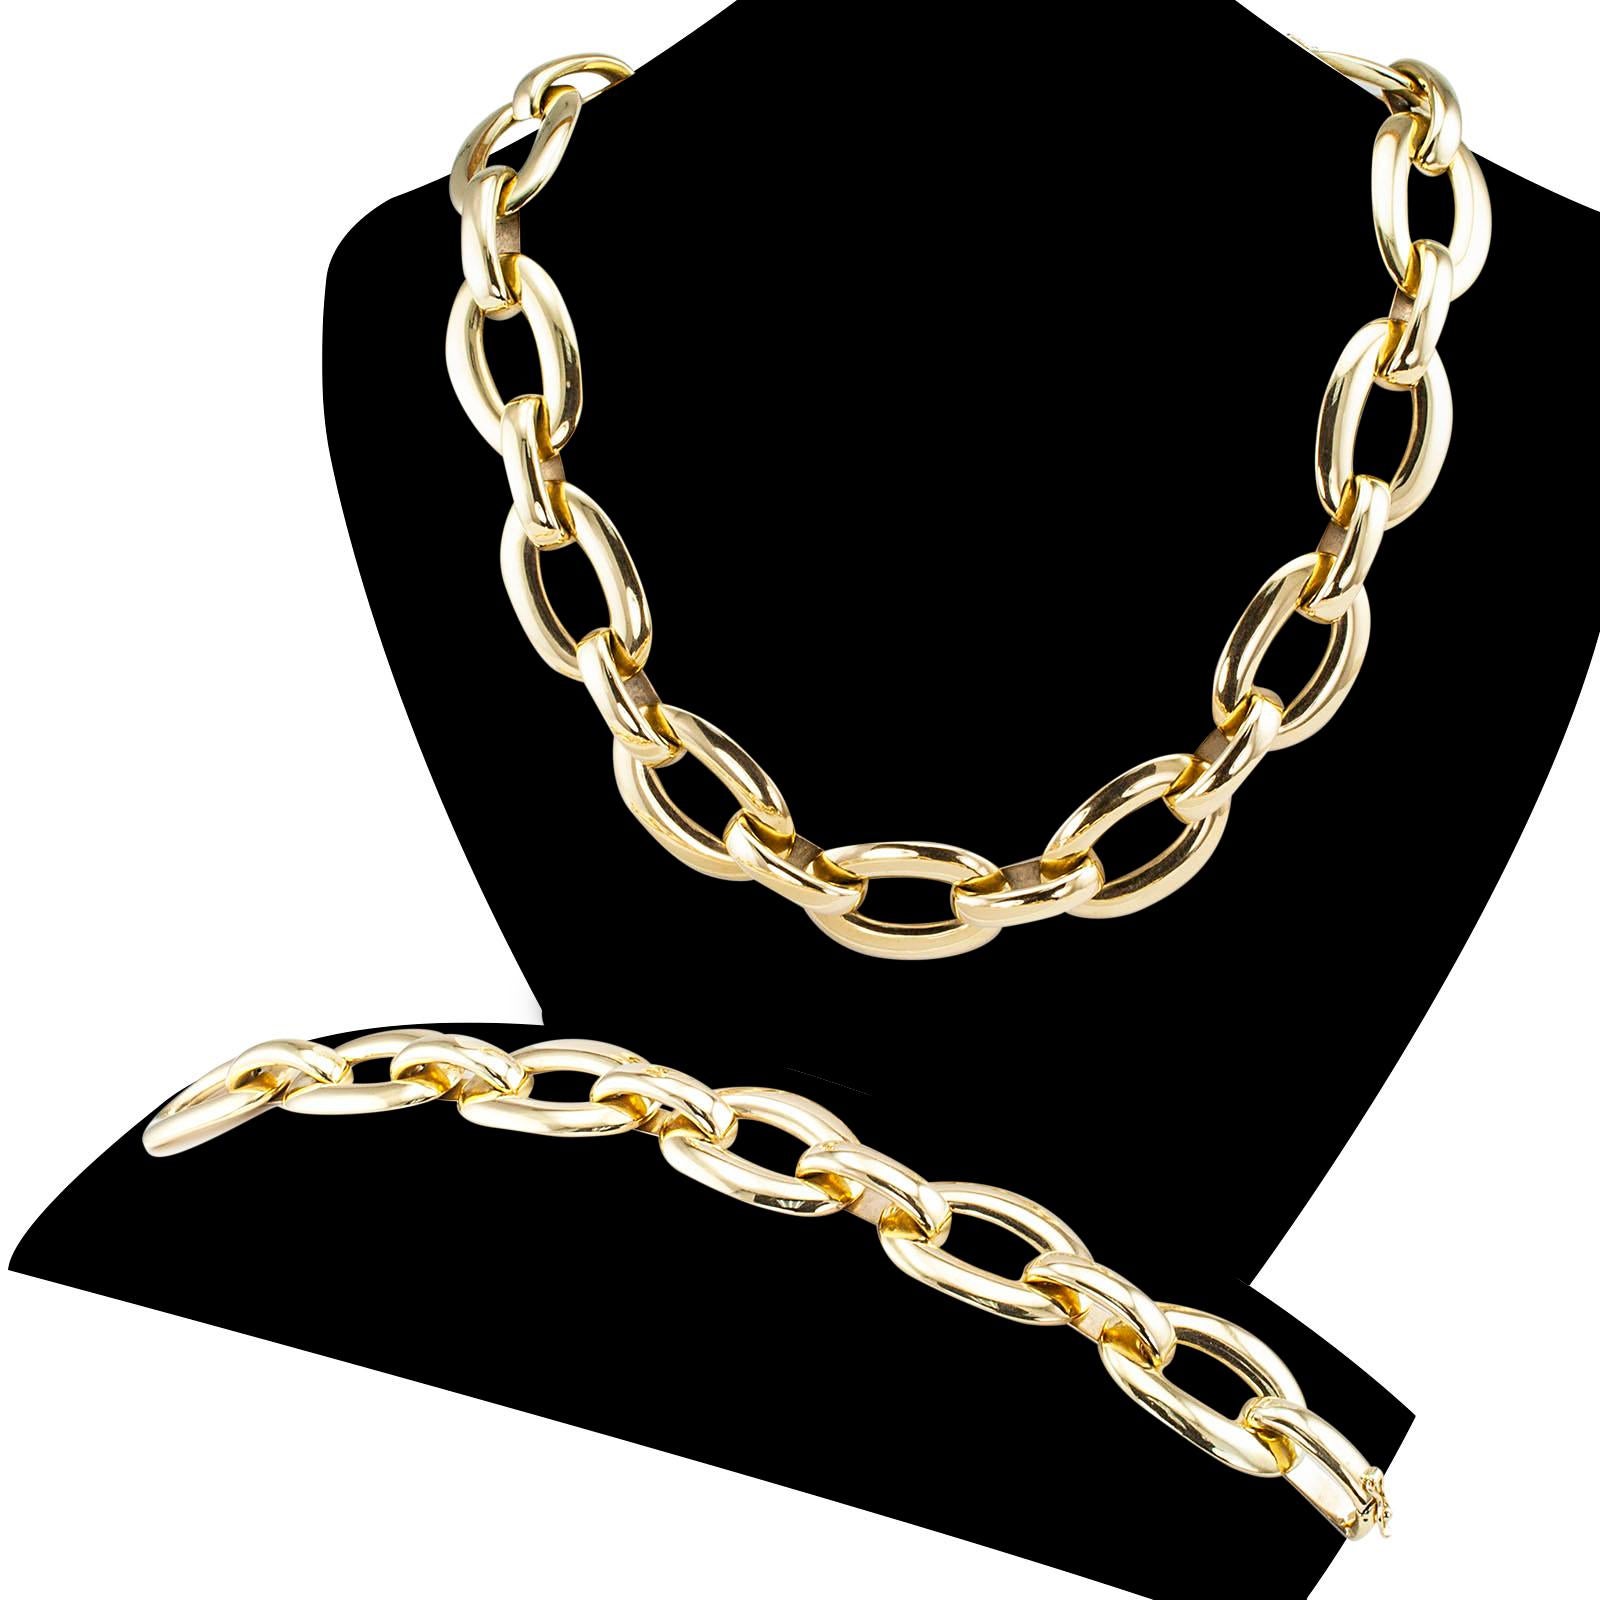  Estate transformable yellow gold link bracelet and necklace set circa 1970.

DETAILS:
METAL:  18-karat yellow gold.

MEASUREMENTS:  13/16” (2.1 cm) wide and 25-1/2” (63.5 cm) long overall.
                BRACELET:  approximately 8” (20.9 cm) long